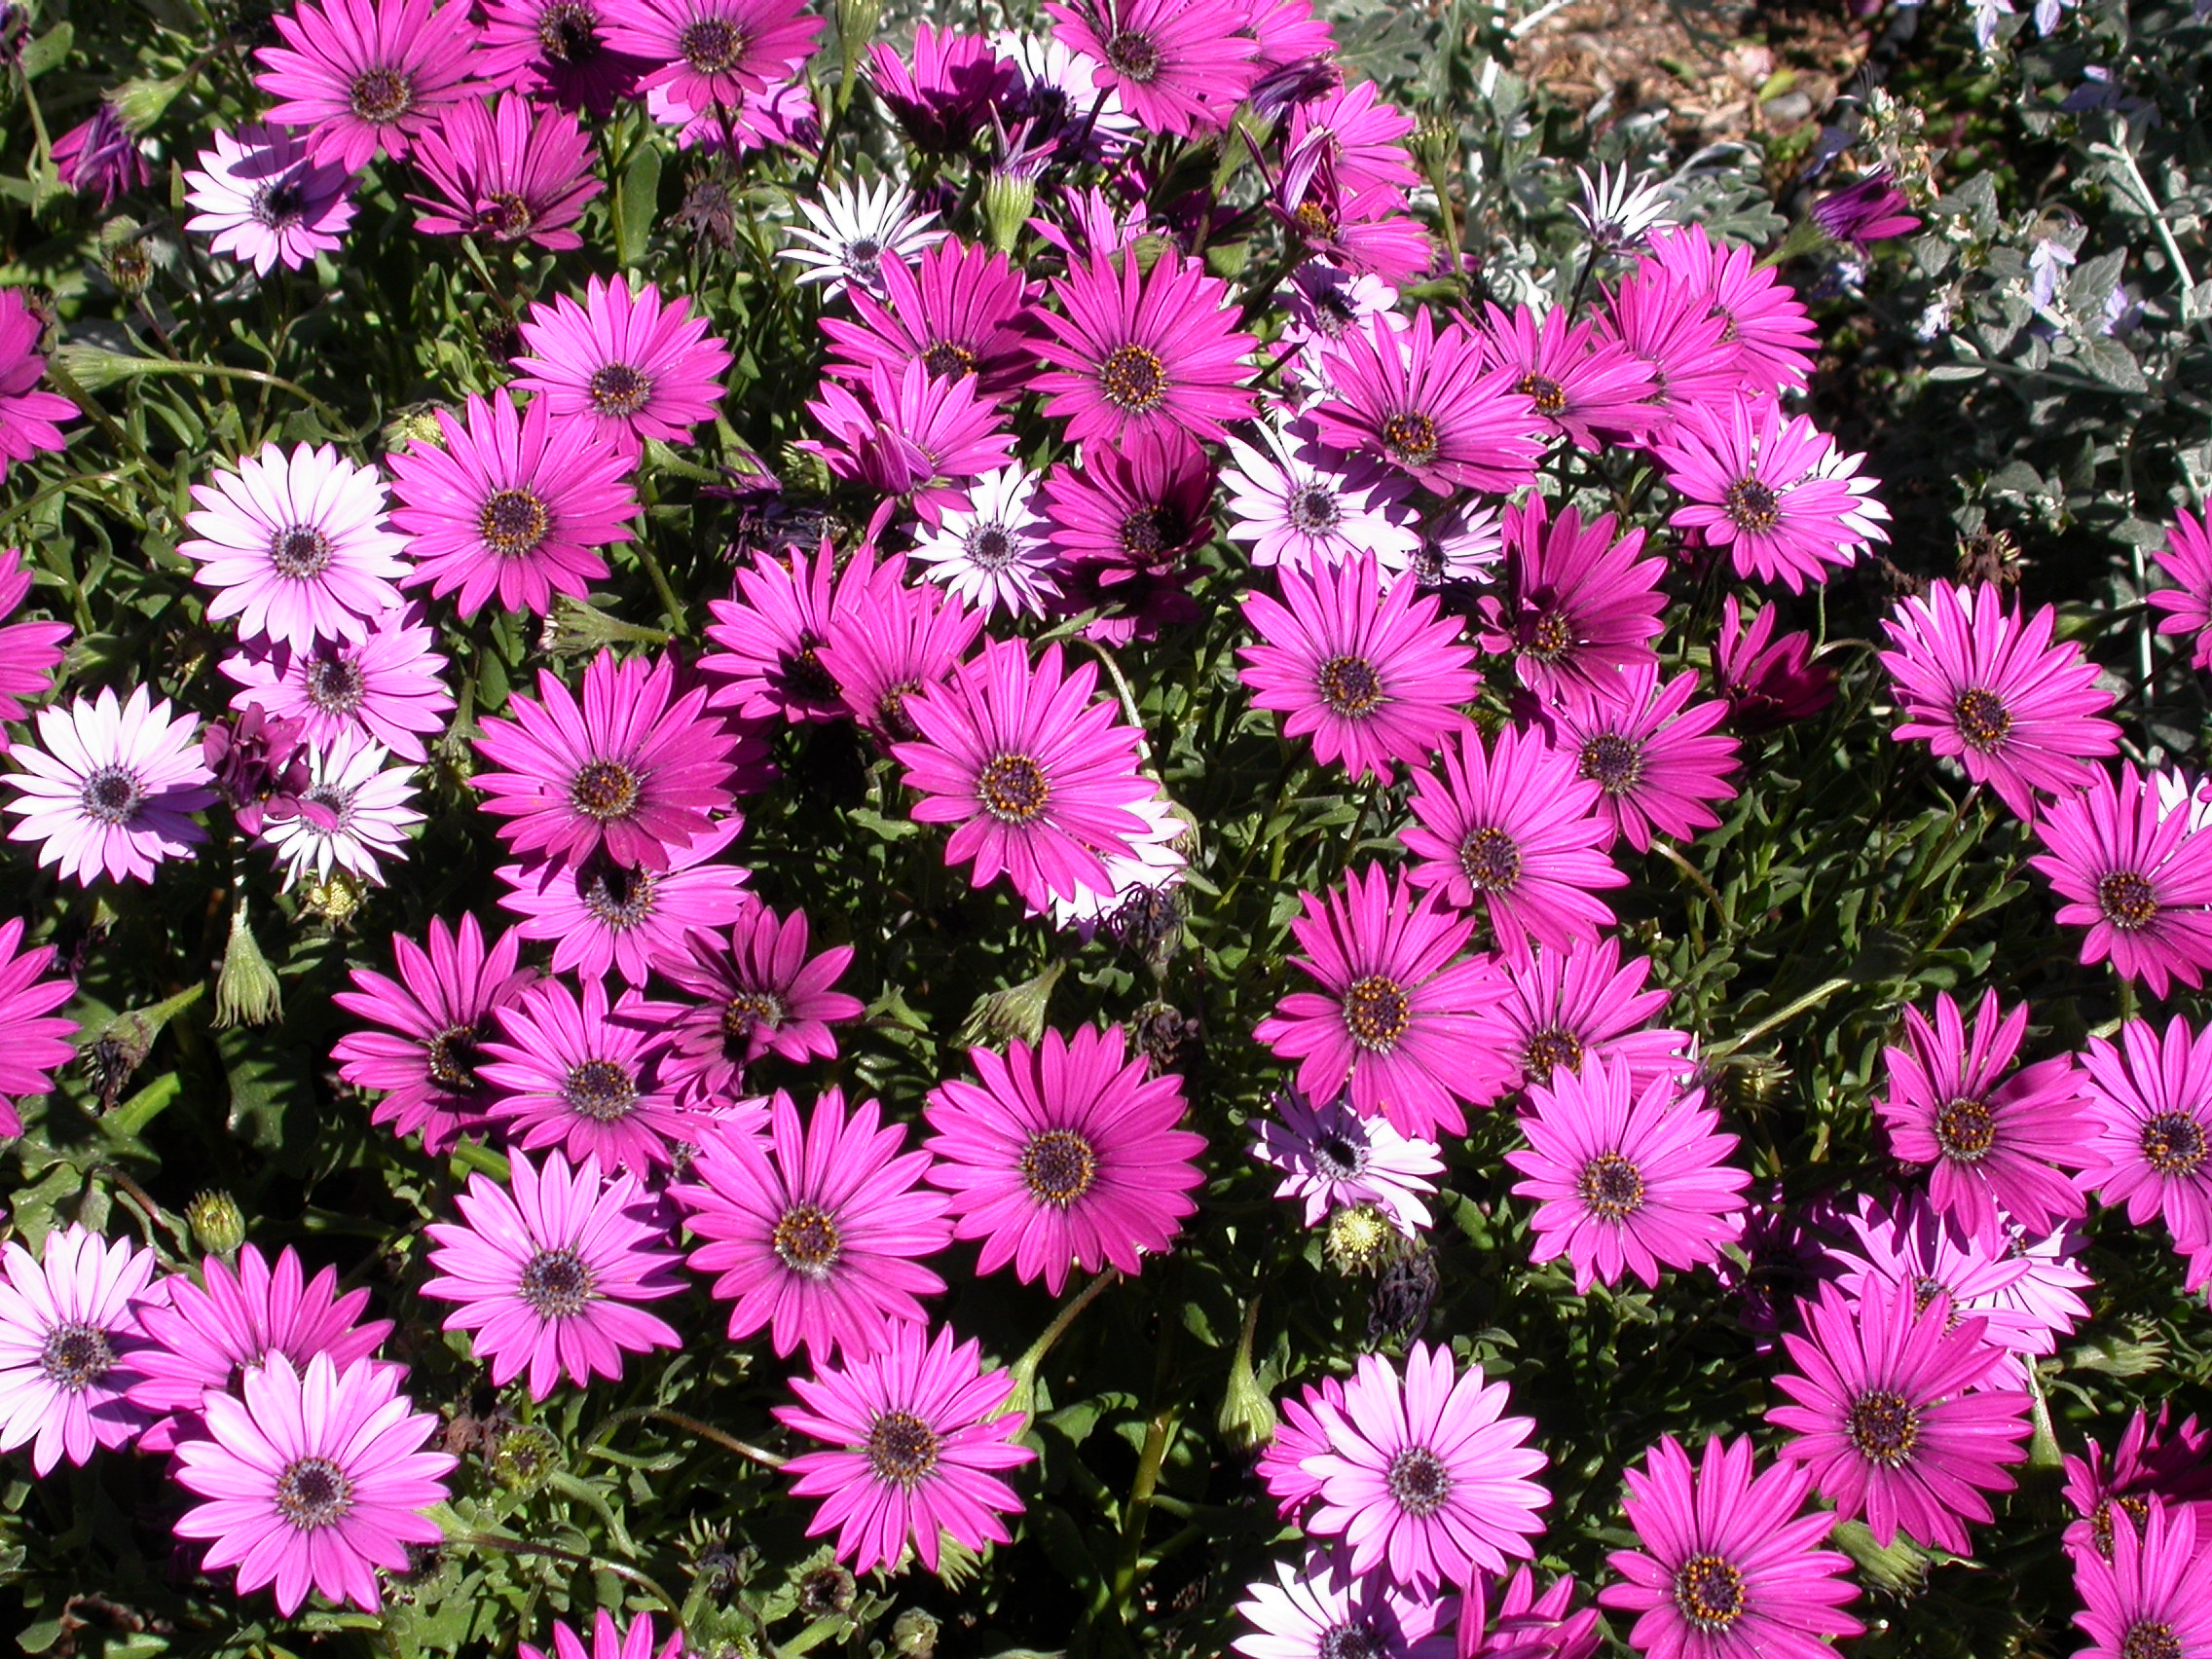 Jobs for March/ April, Transplanting Osteospermums and taking cuttings